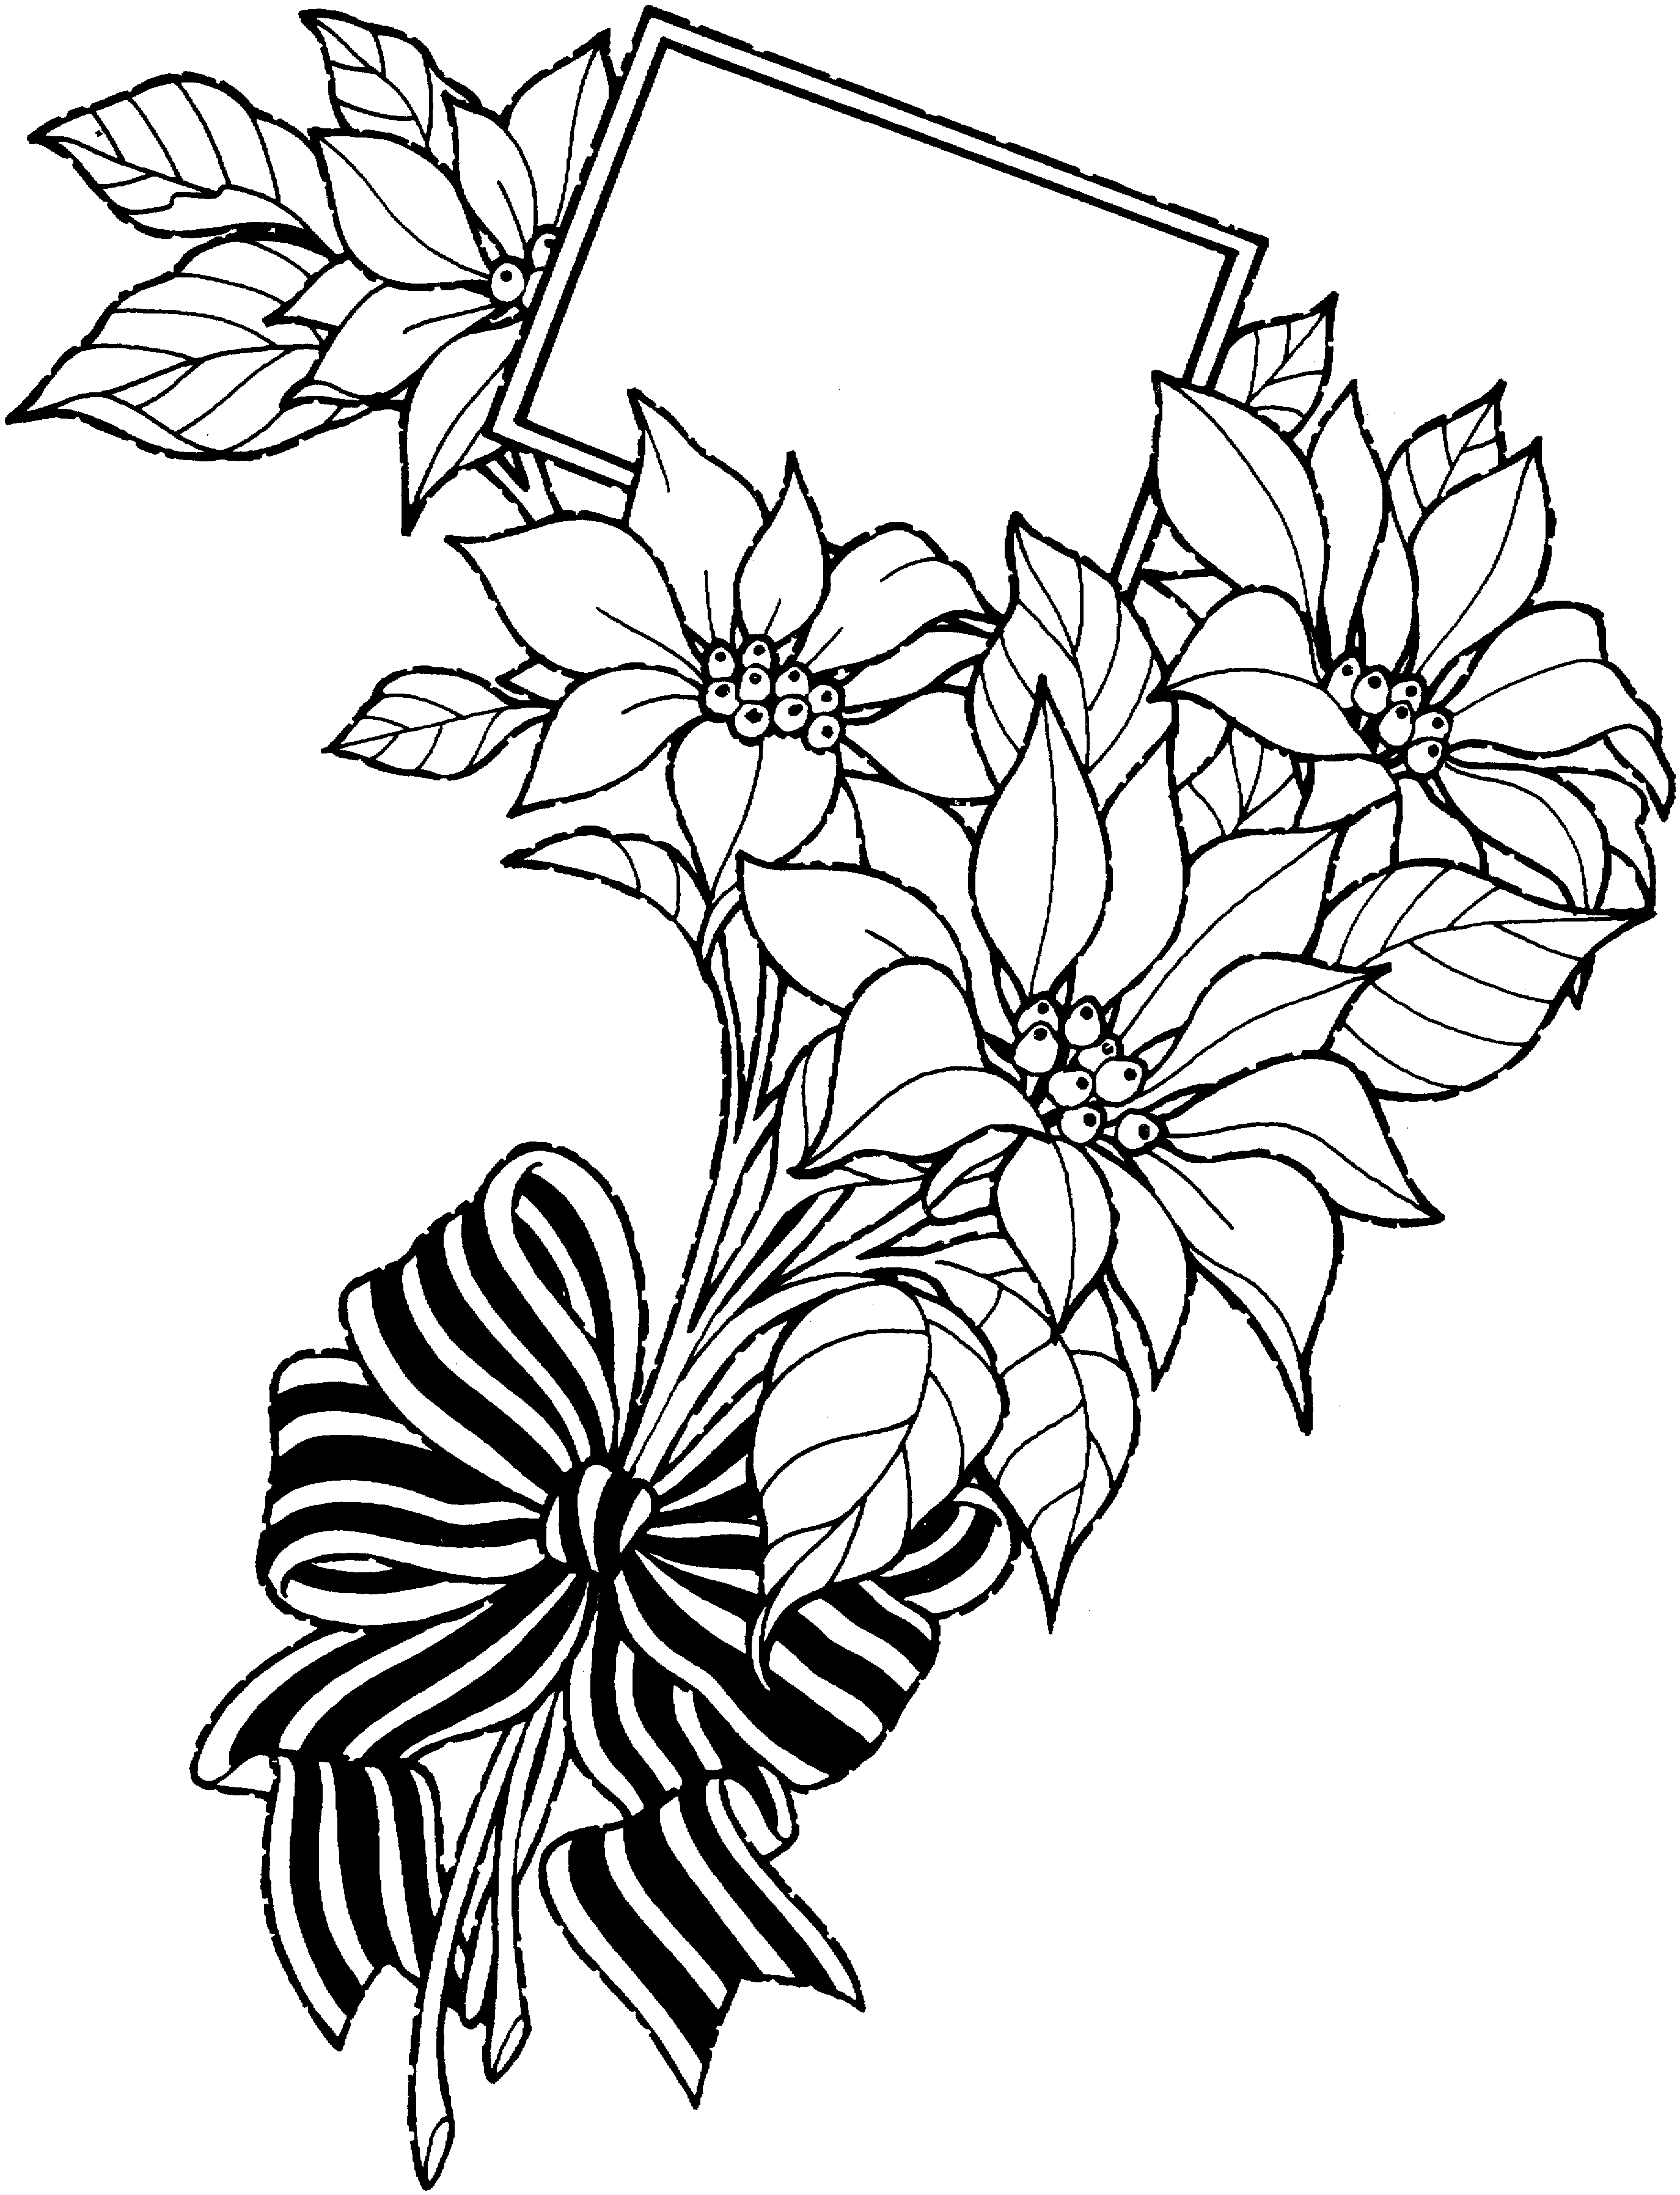 Drawing Pictures Of Flowers | Free download on ClipArtMag